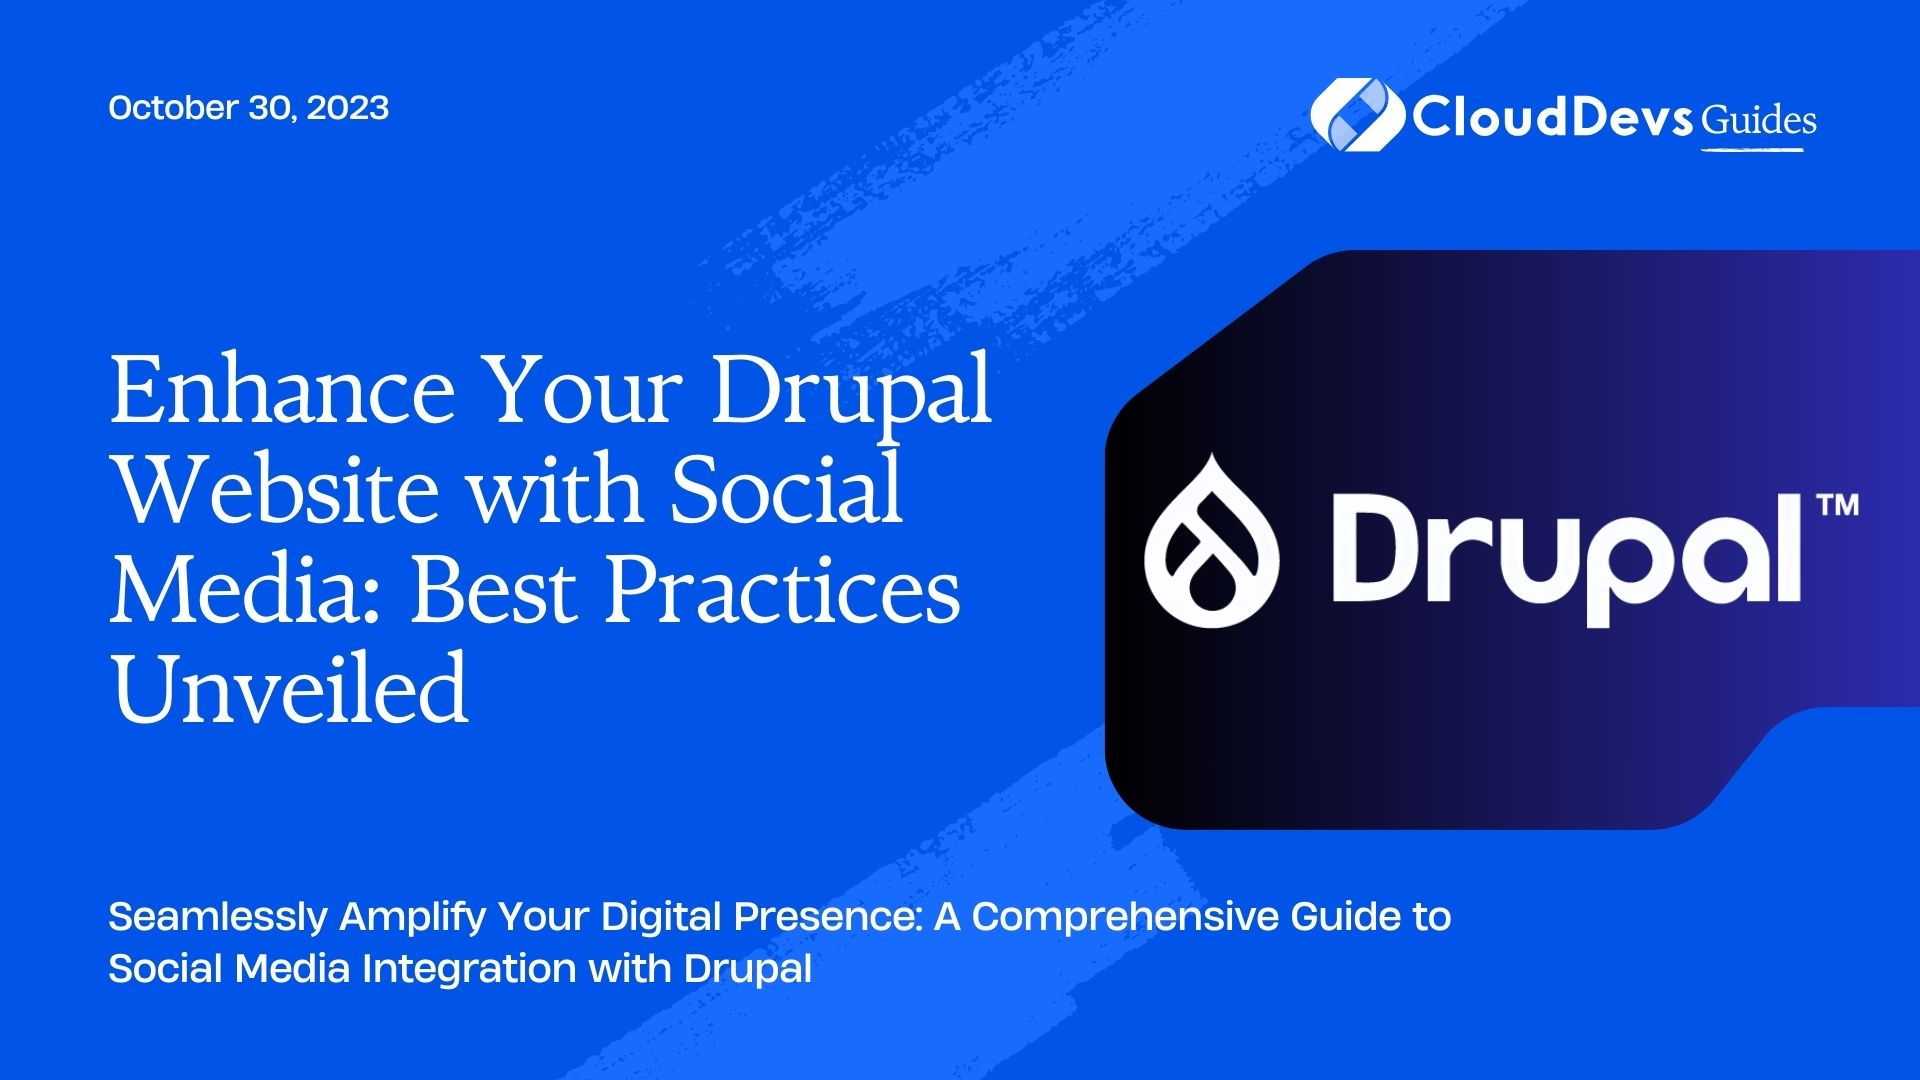 Enhance Your Drupal Website with Social Media: Best Practices Unveiled